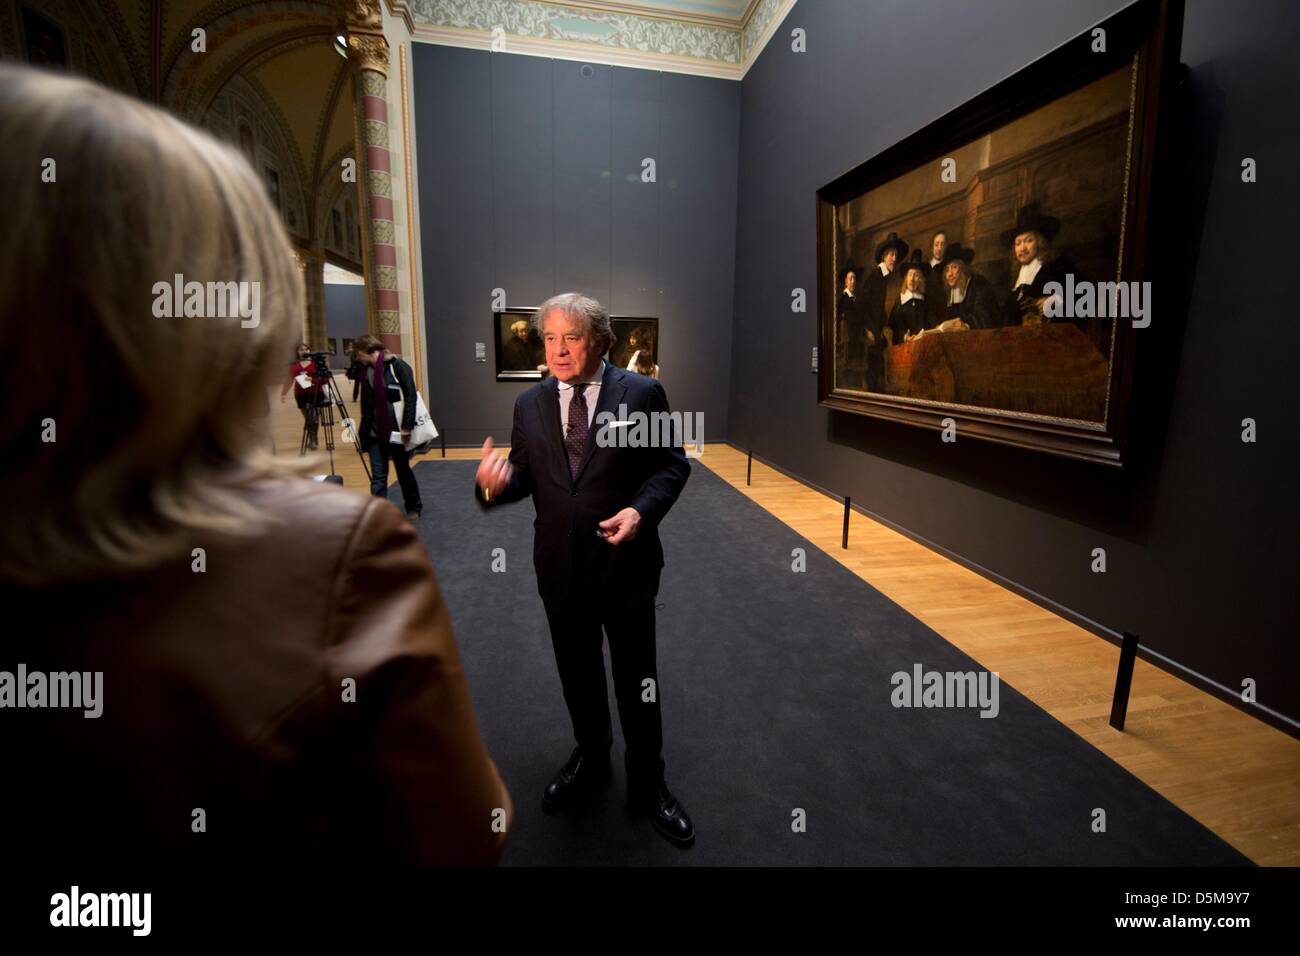 One of the architects of the newly renovated and opened rijksmuseum, amsterdam Stock Photo